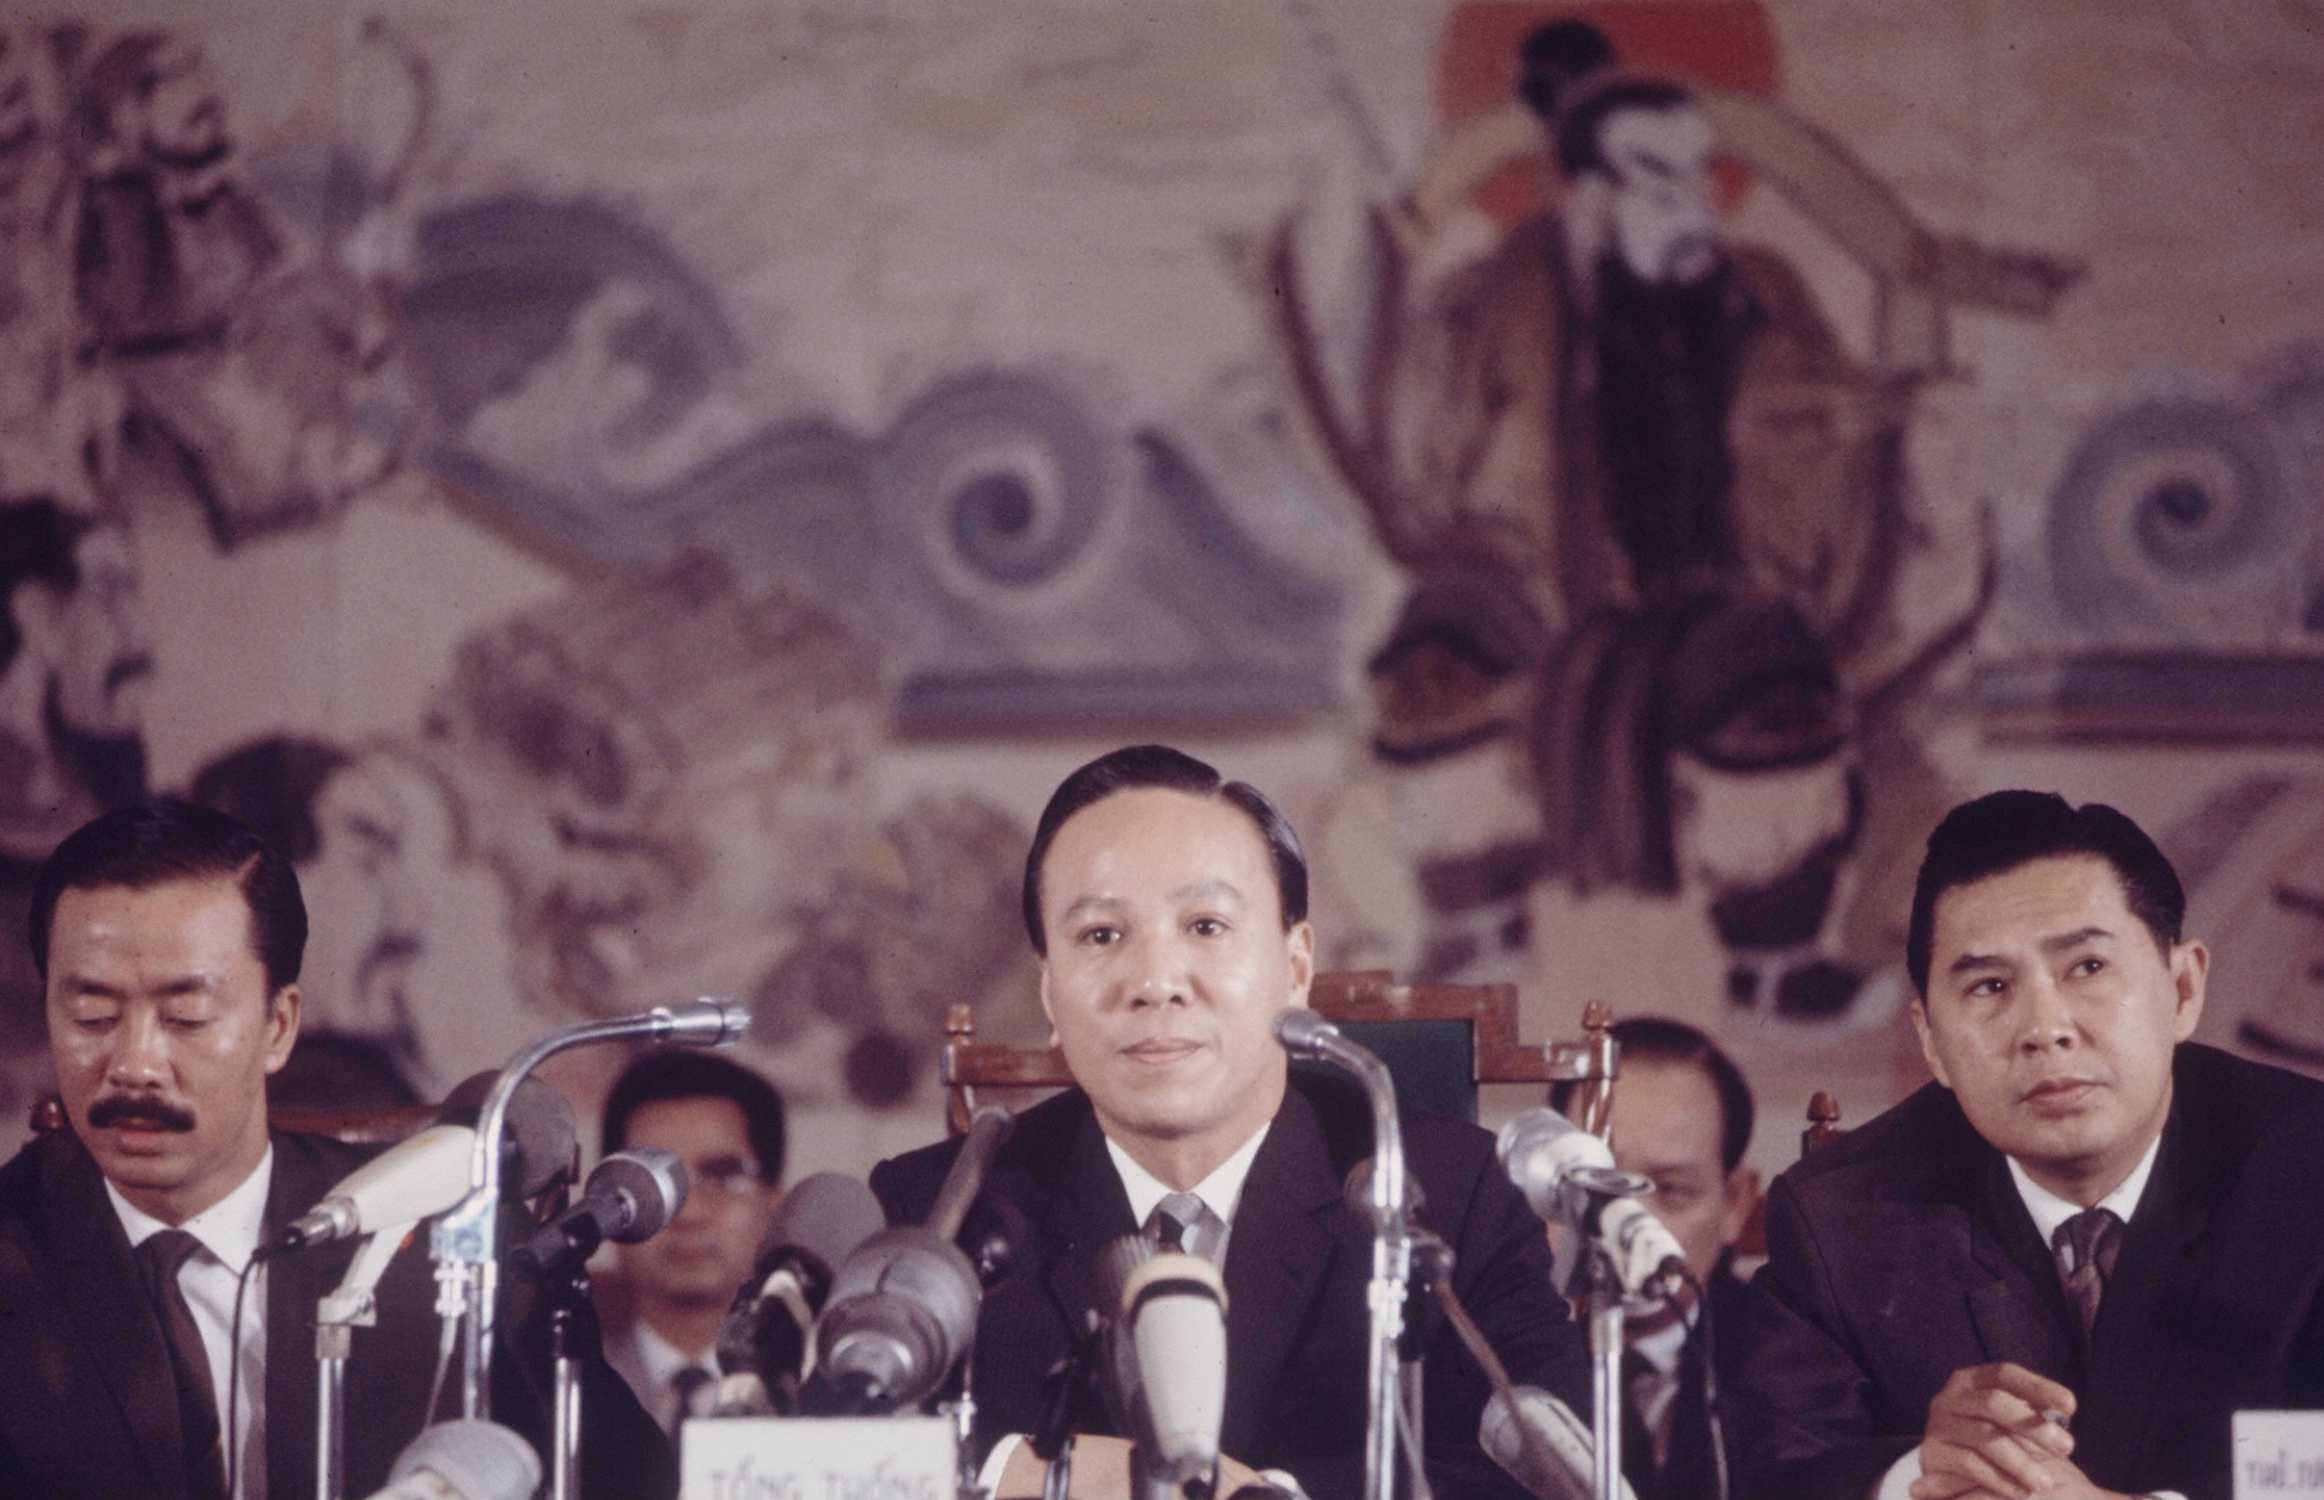 a group of men sitting at a desk with microphones